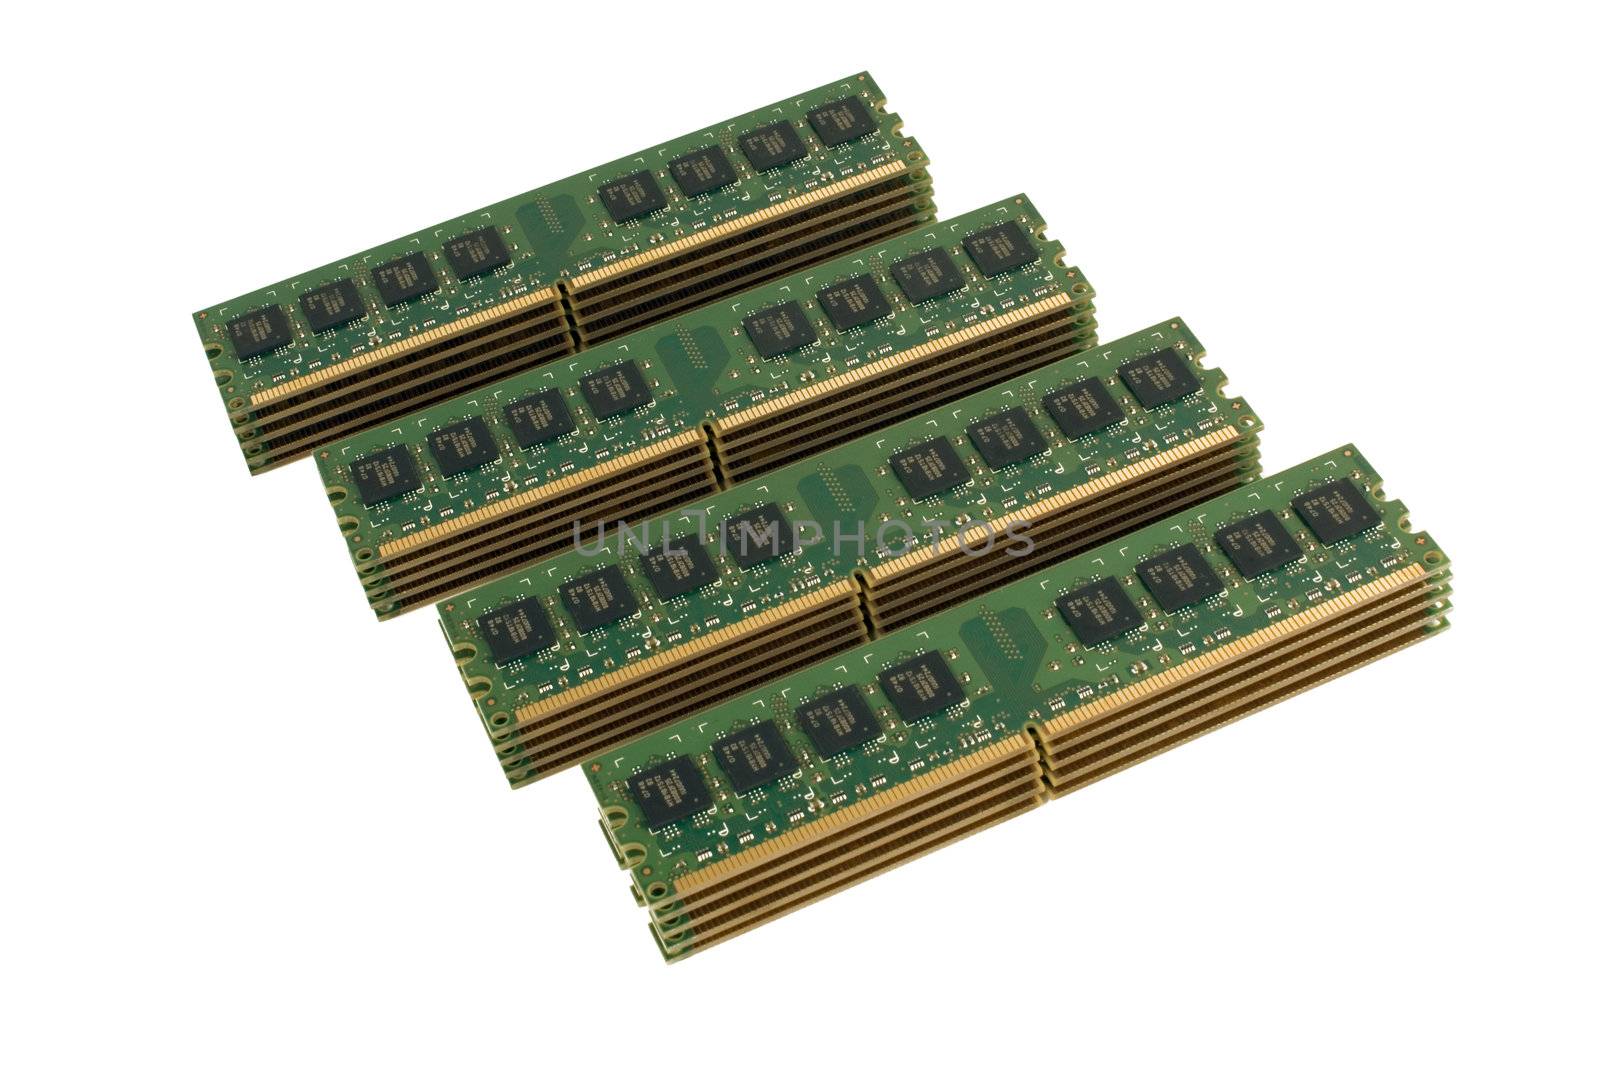 4 column of computer memory modules DDR2, isolated